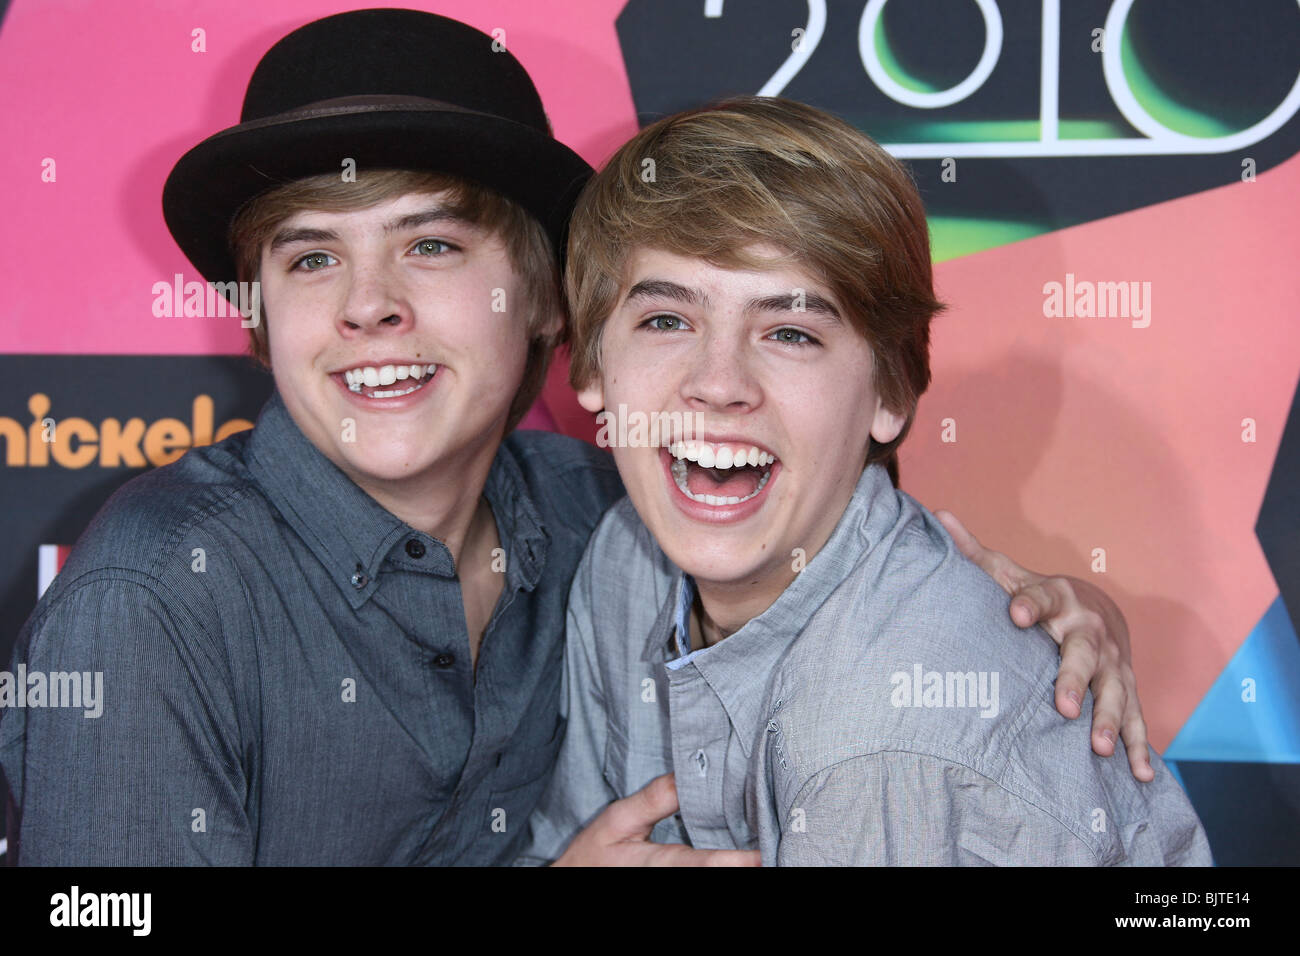 DYLAN SPROUSE COLE SPROUSE NICKELODEON KIDS CHOICE AWARDS 2010 LOS ANGELES CA USA 27 March 2010 Stock Photo